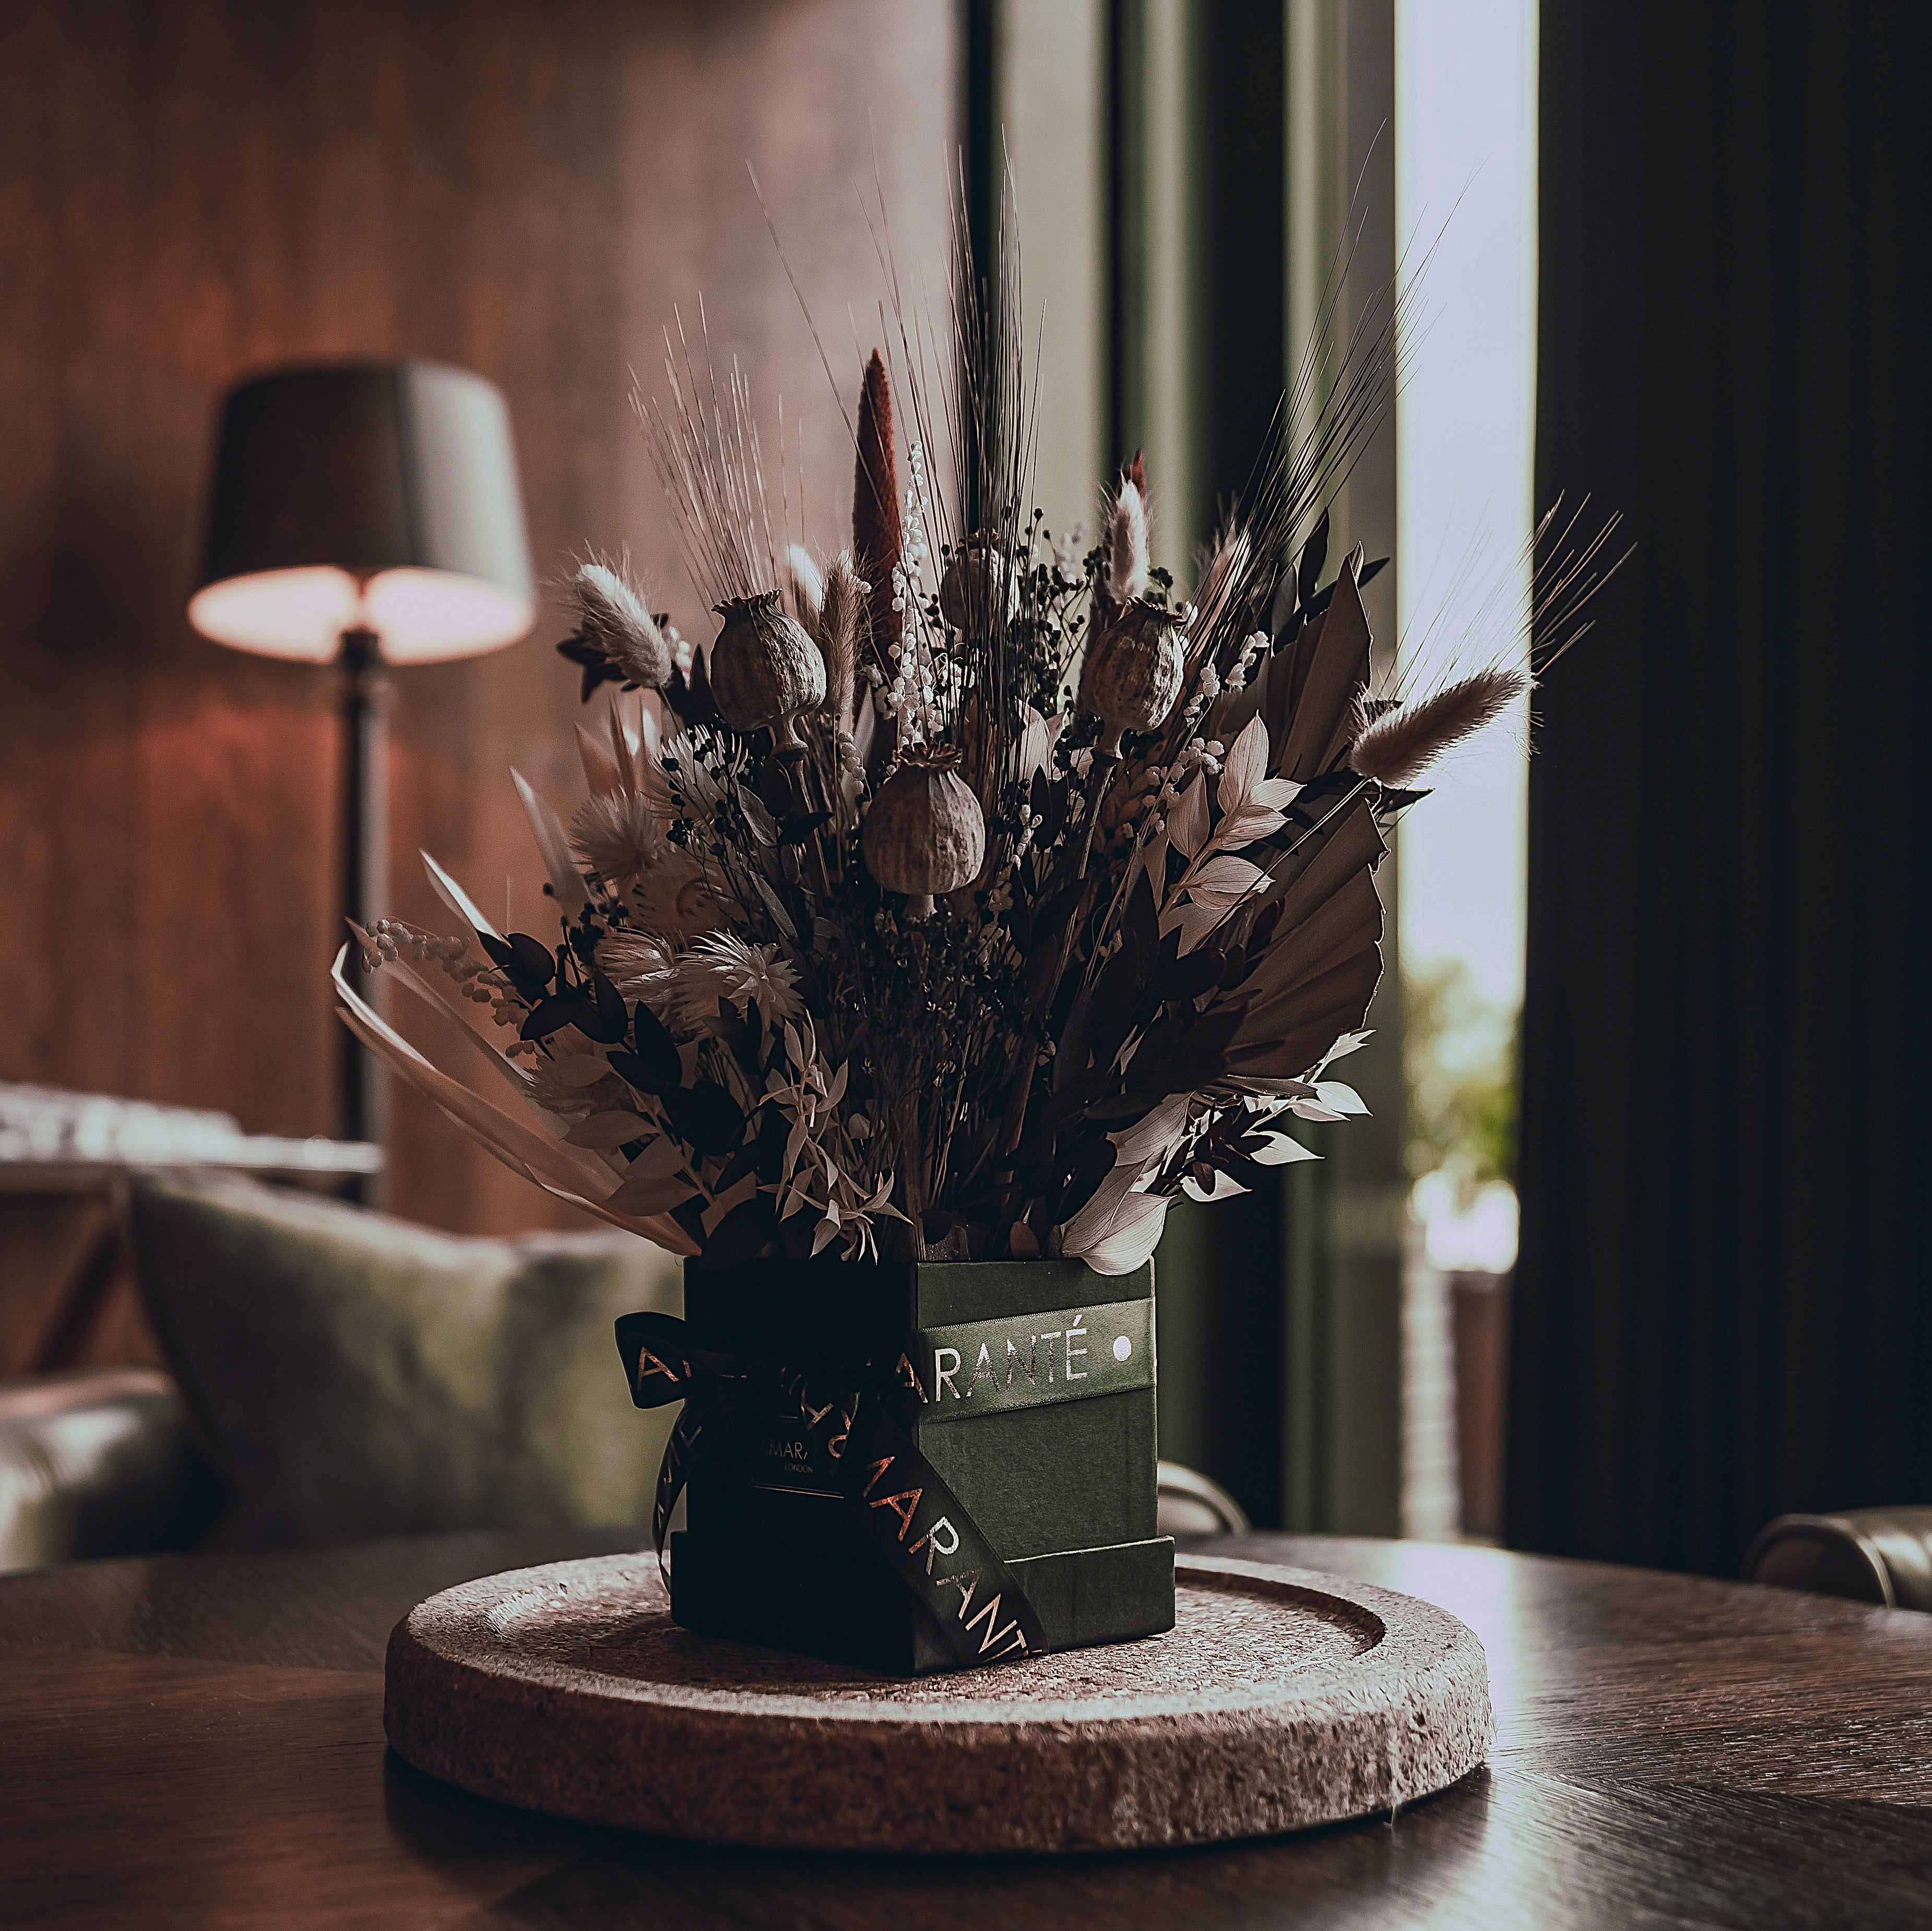 An Amaranté bespoke floral arrangement for events stands majestically on a circular cork base, featuring an array of dried blooms in earthy tones, perfectly complementing the moody atmosphere of a luxurious space at SOHO HOUSE.